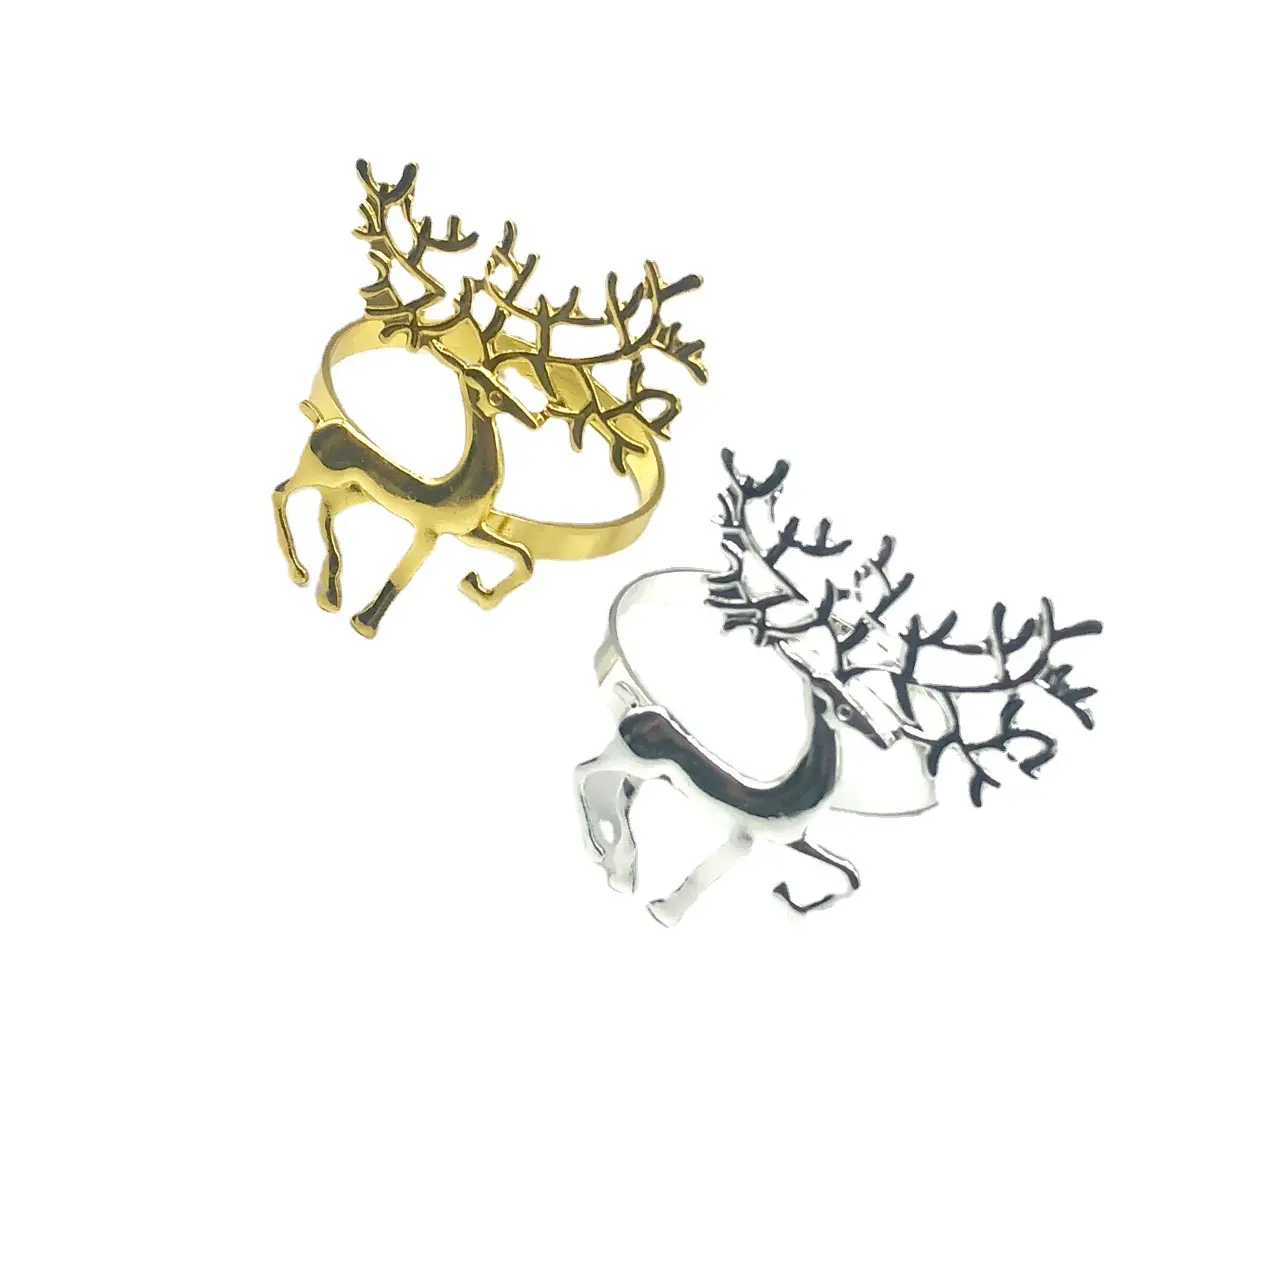 Wholesale Christmas Napkin Rings Holder, Gold Deer Napkin Rings for Party Wedding Gathering Dinning Table Setting Decoration